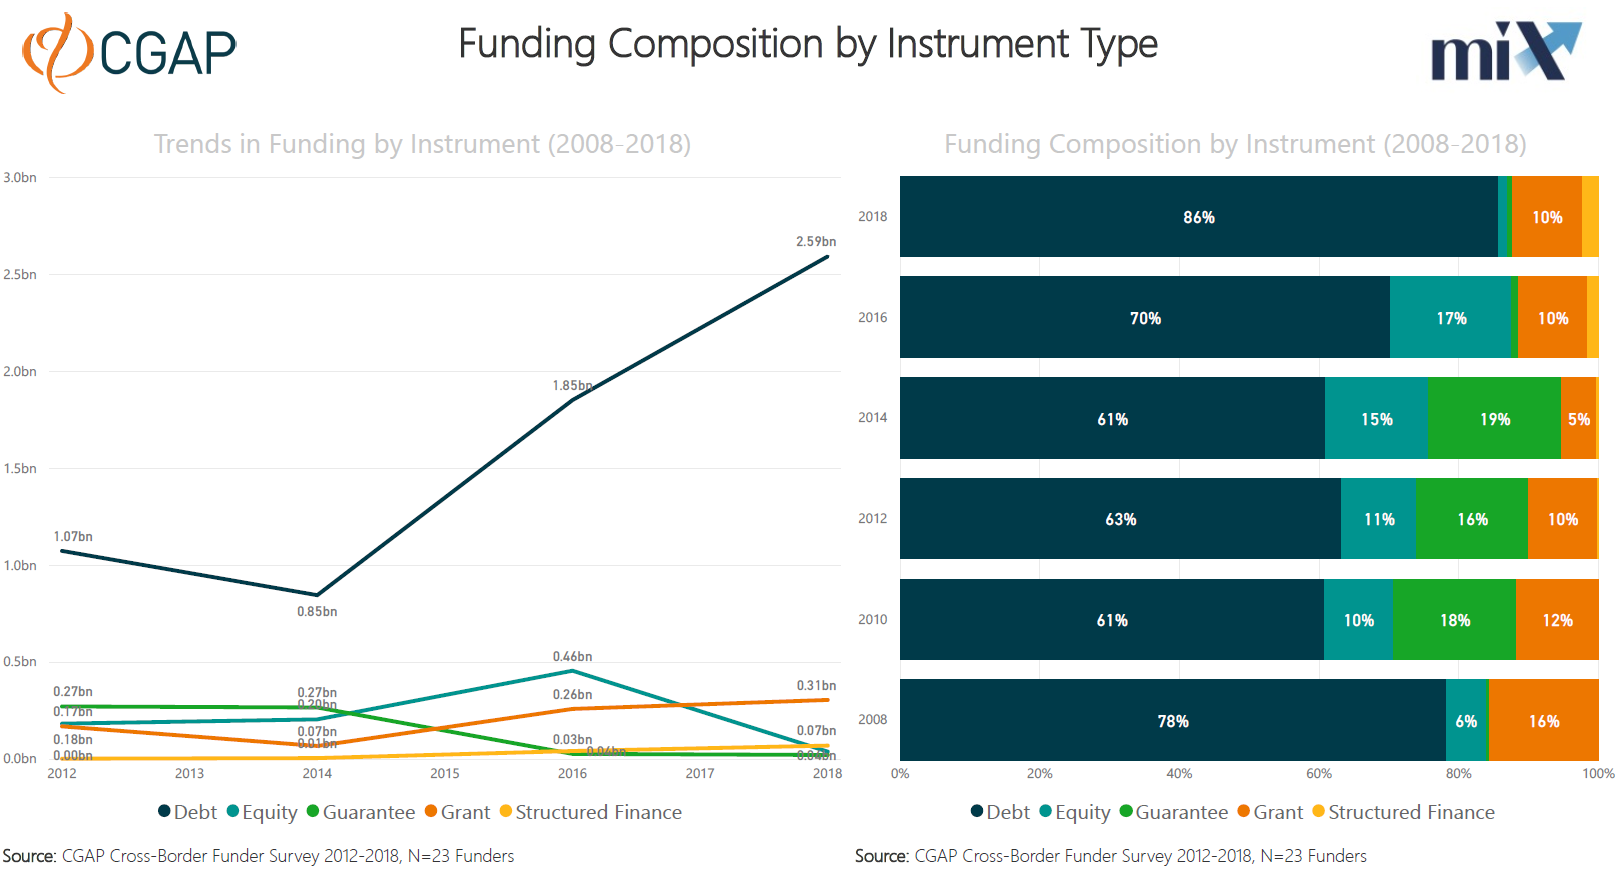 How do they fund in East Asia and the Pacific? (Funding instruments)